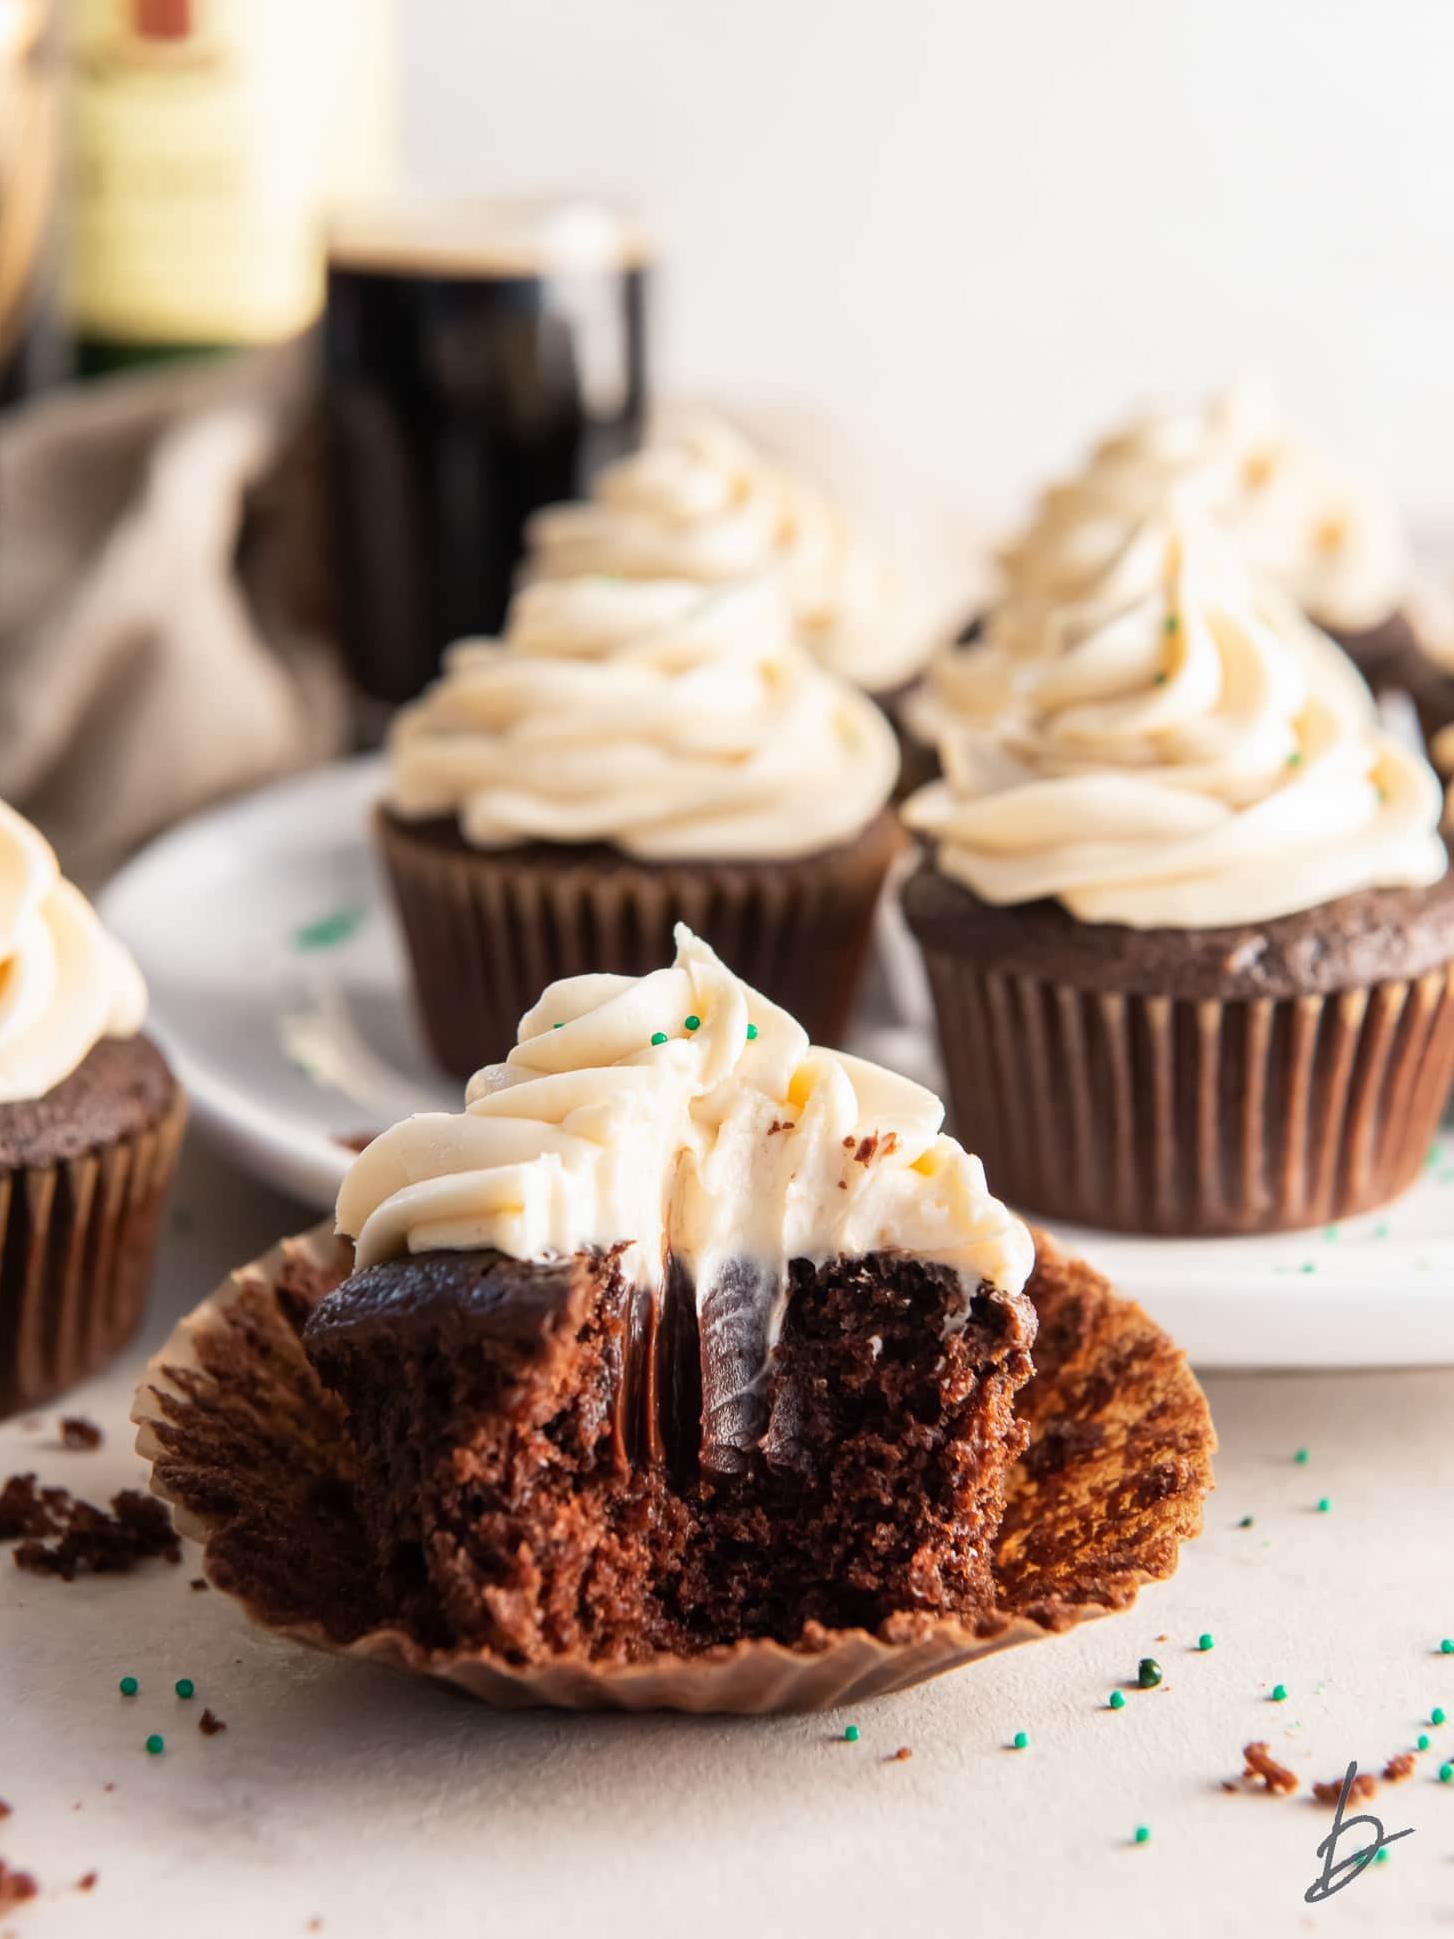  Get creative with frosting and toppings to make these cupcakes truly unique.